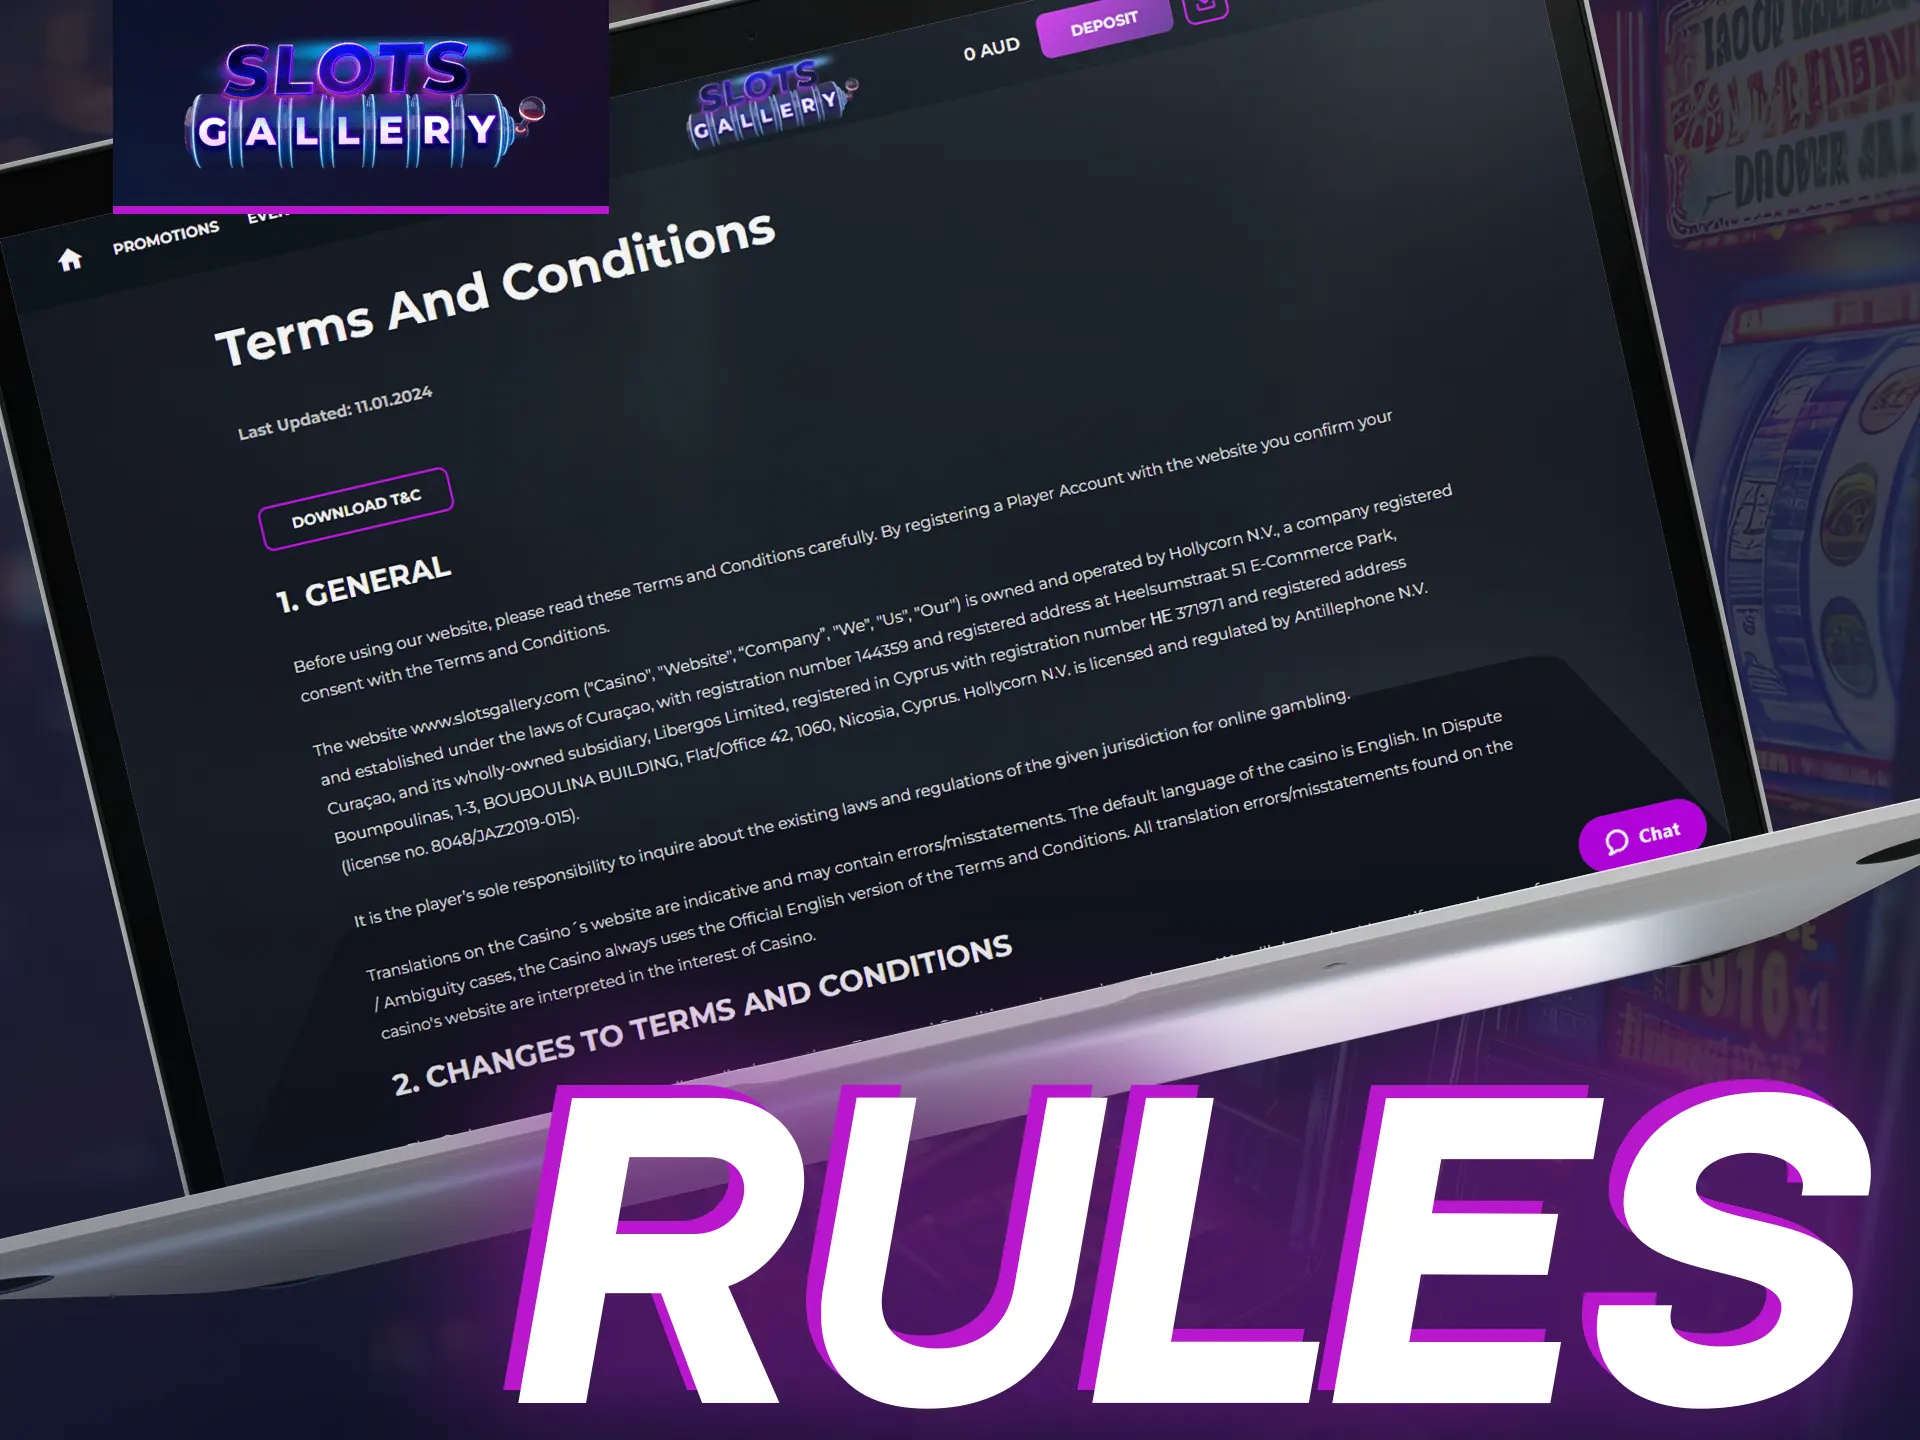 Enjoy Slots Gallery with simple rules for secure, fun gaming.